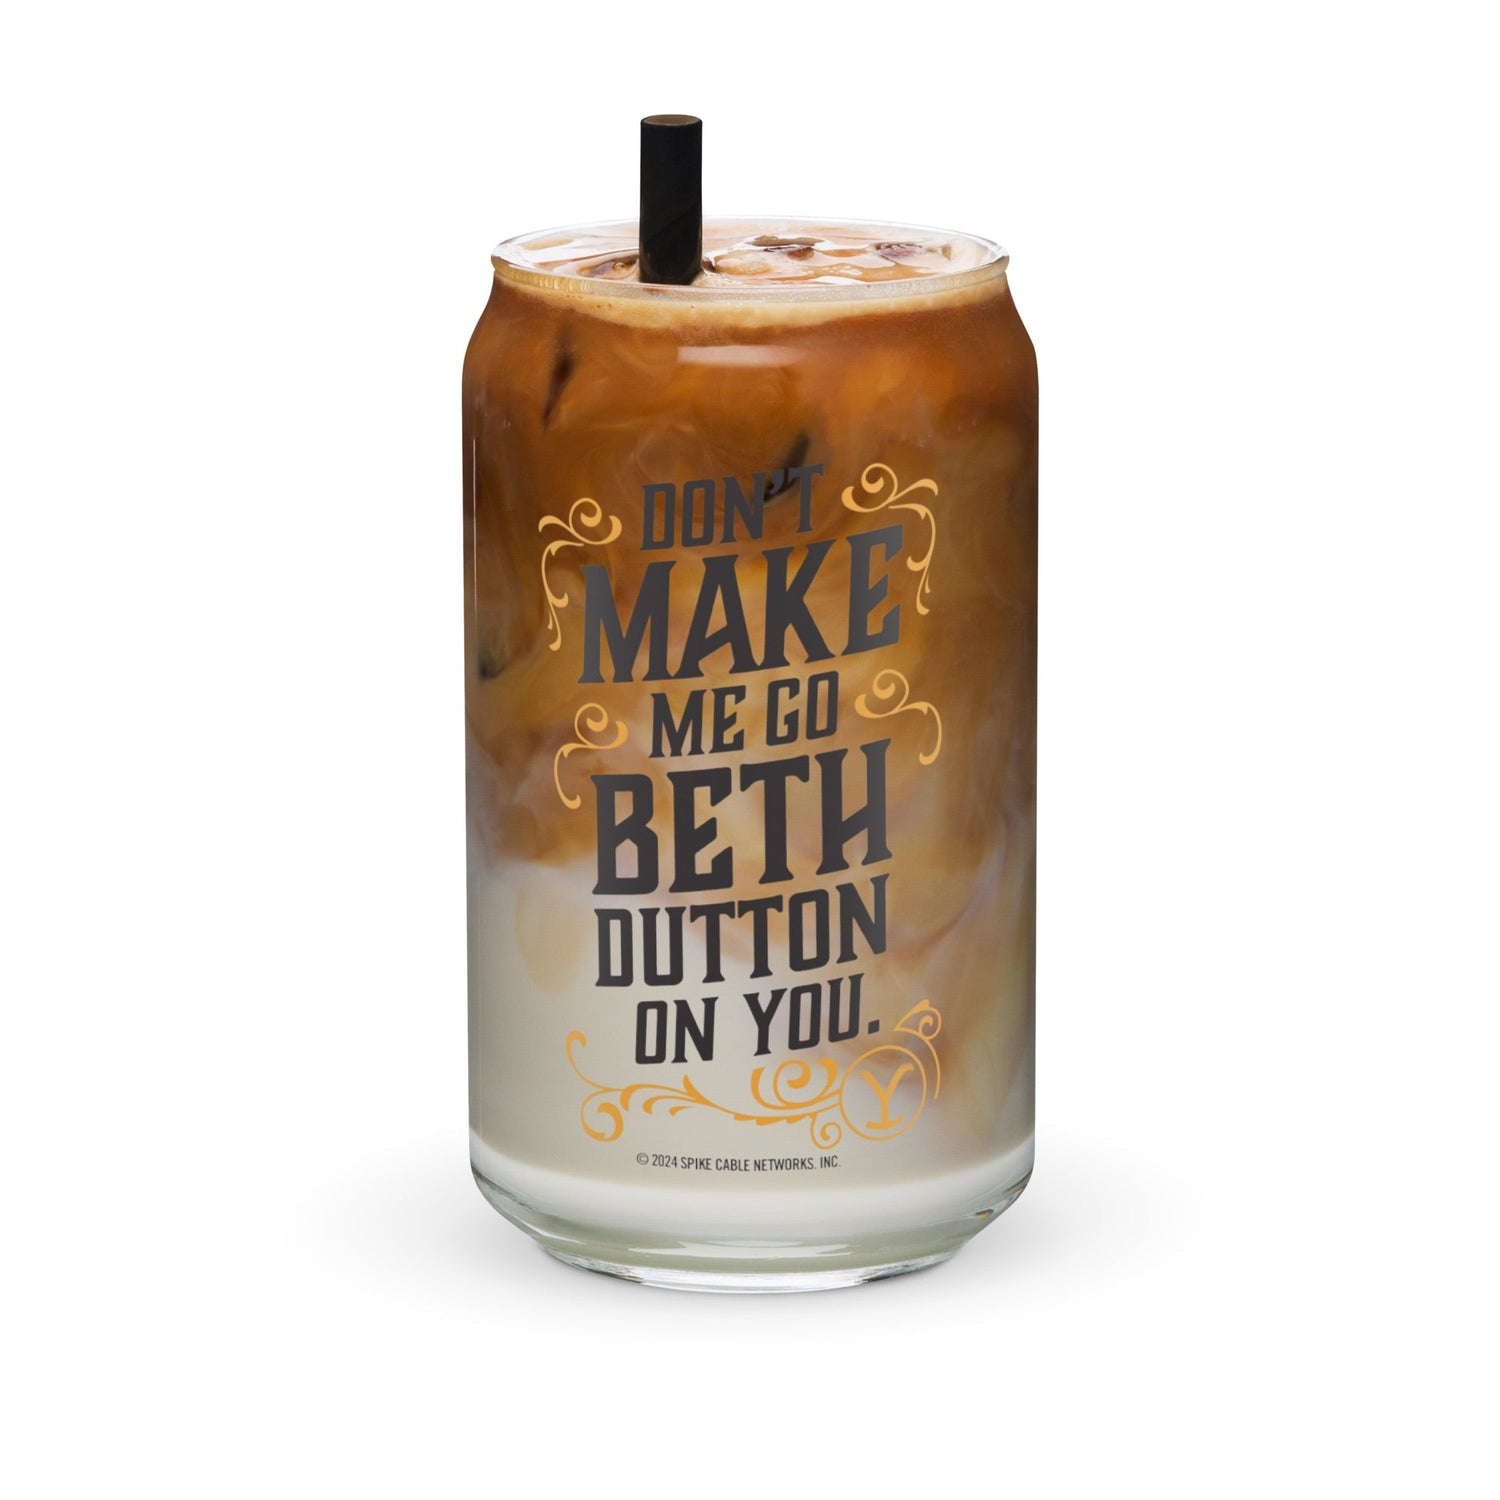 Yellowstone Don't Go Beth Dutton Can Glass - Paramount Shop